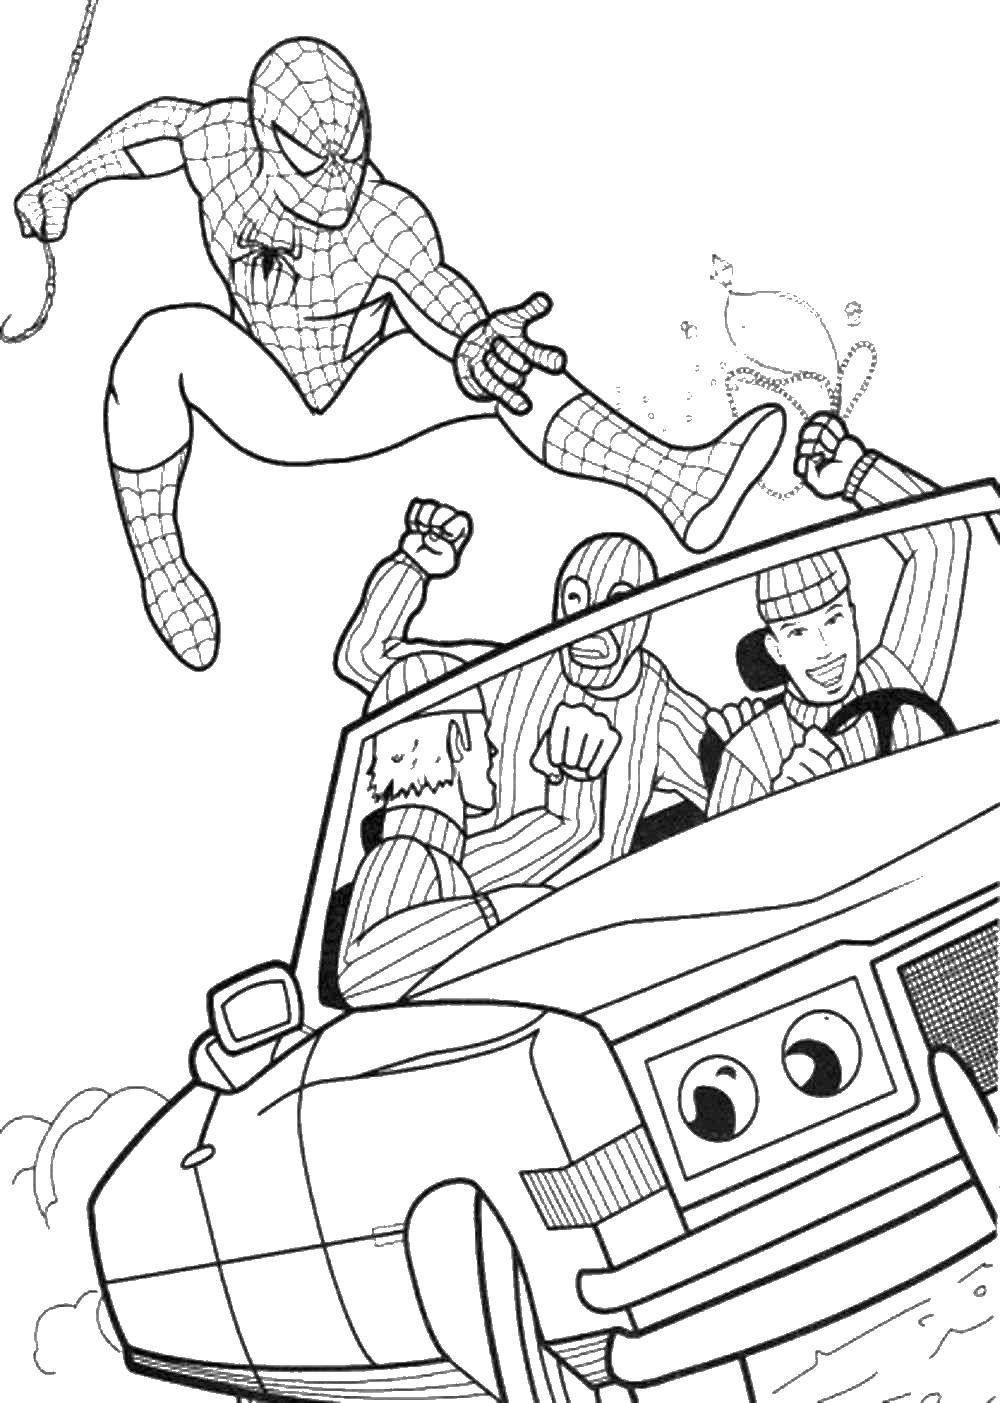 Coloring Spider-man catches criminals. Category coloring pages for girls. Tags:  spider man.